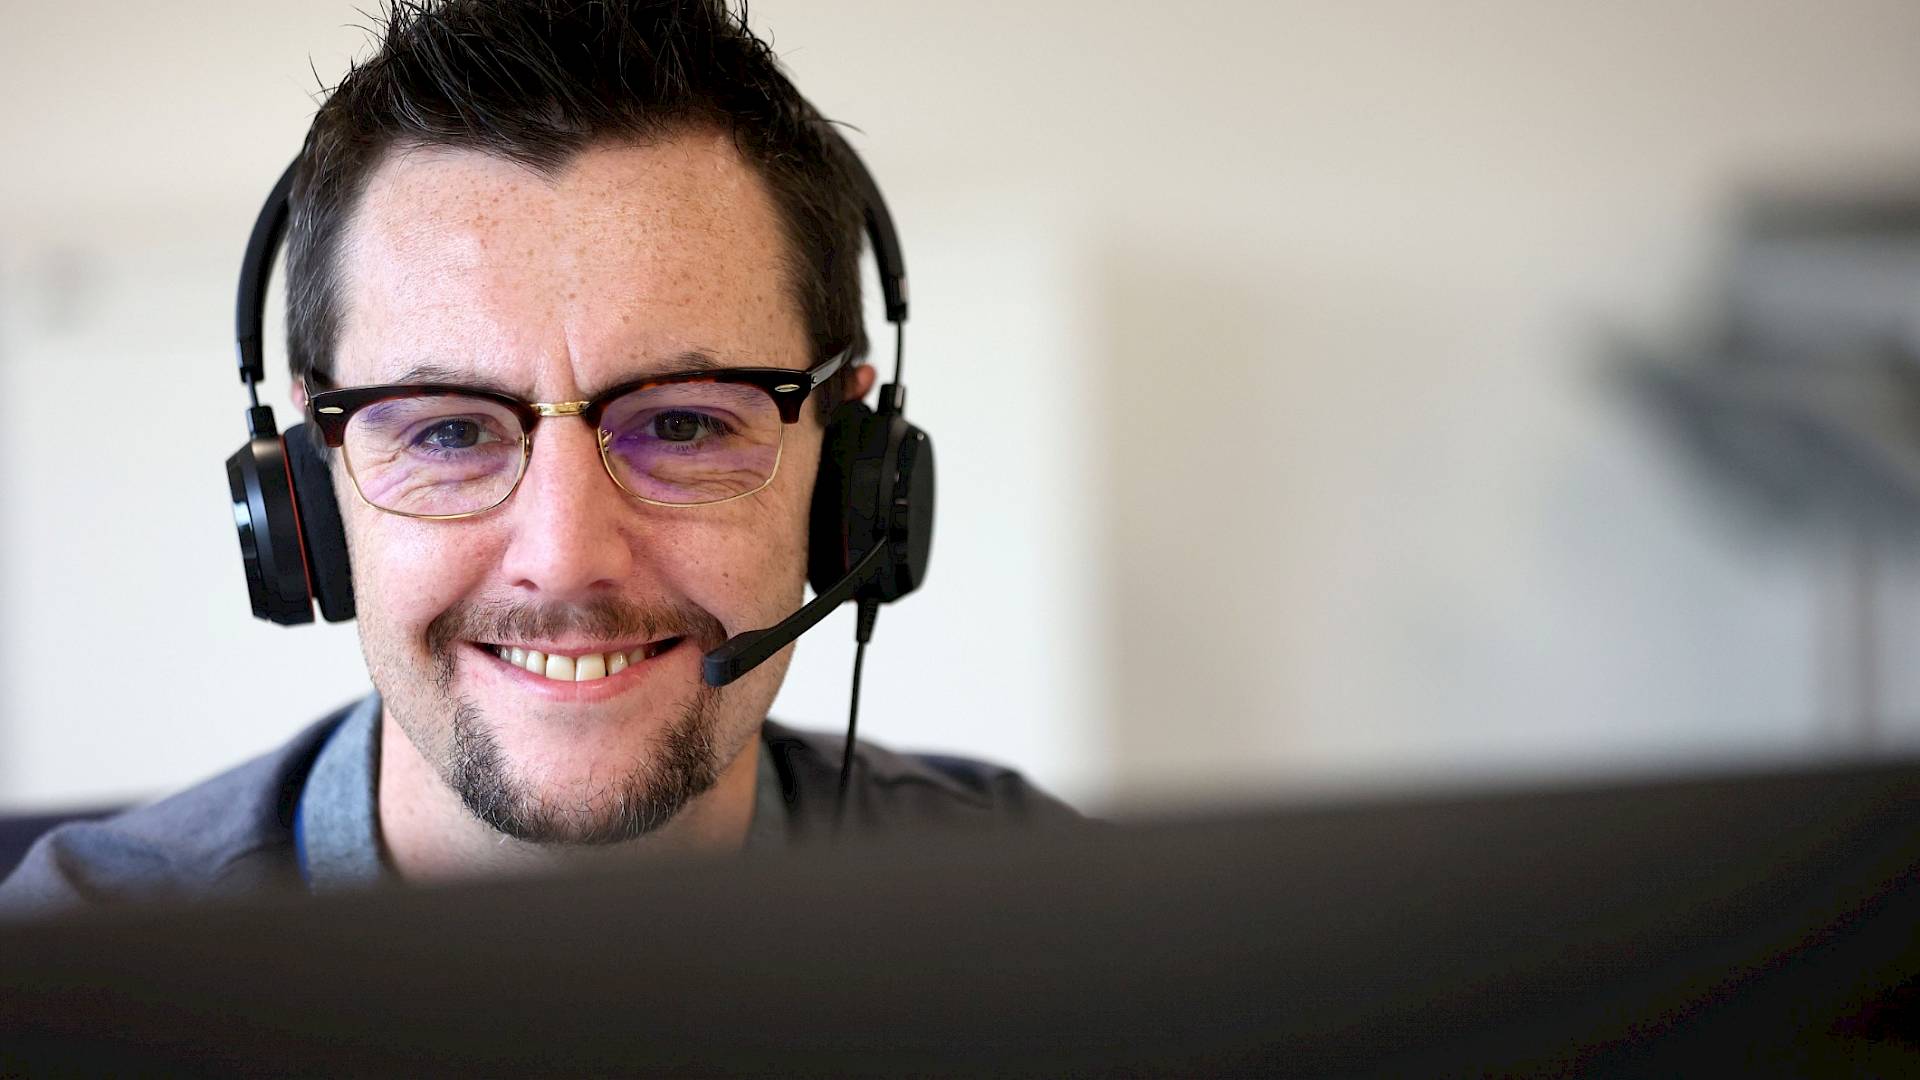 Male customer service agent wearing headset smiling